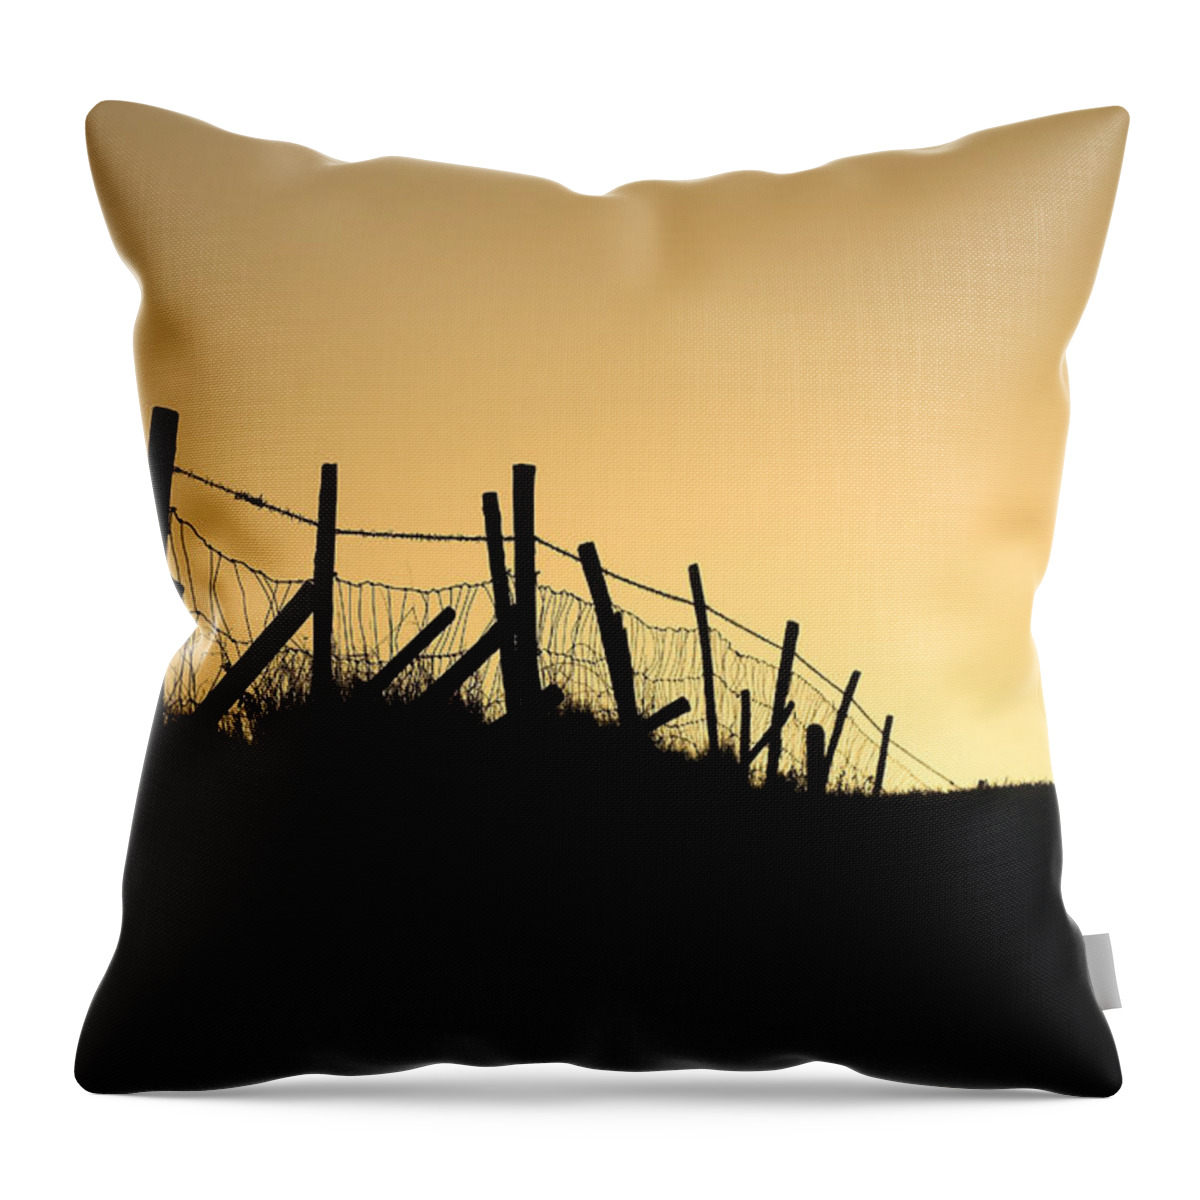 Into Throw Pillow featuring the photograph Into the light by Hazy Apple